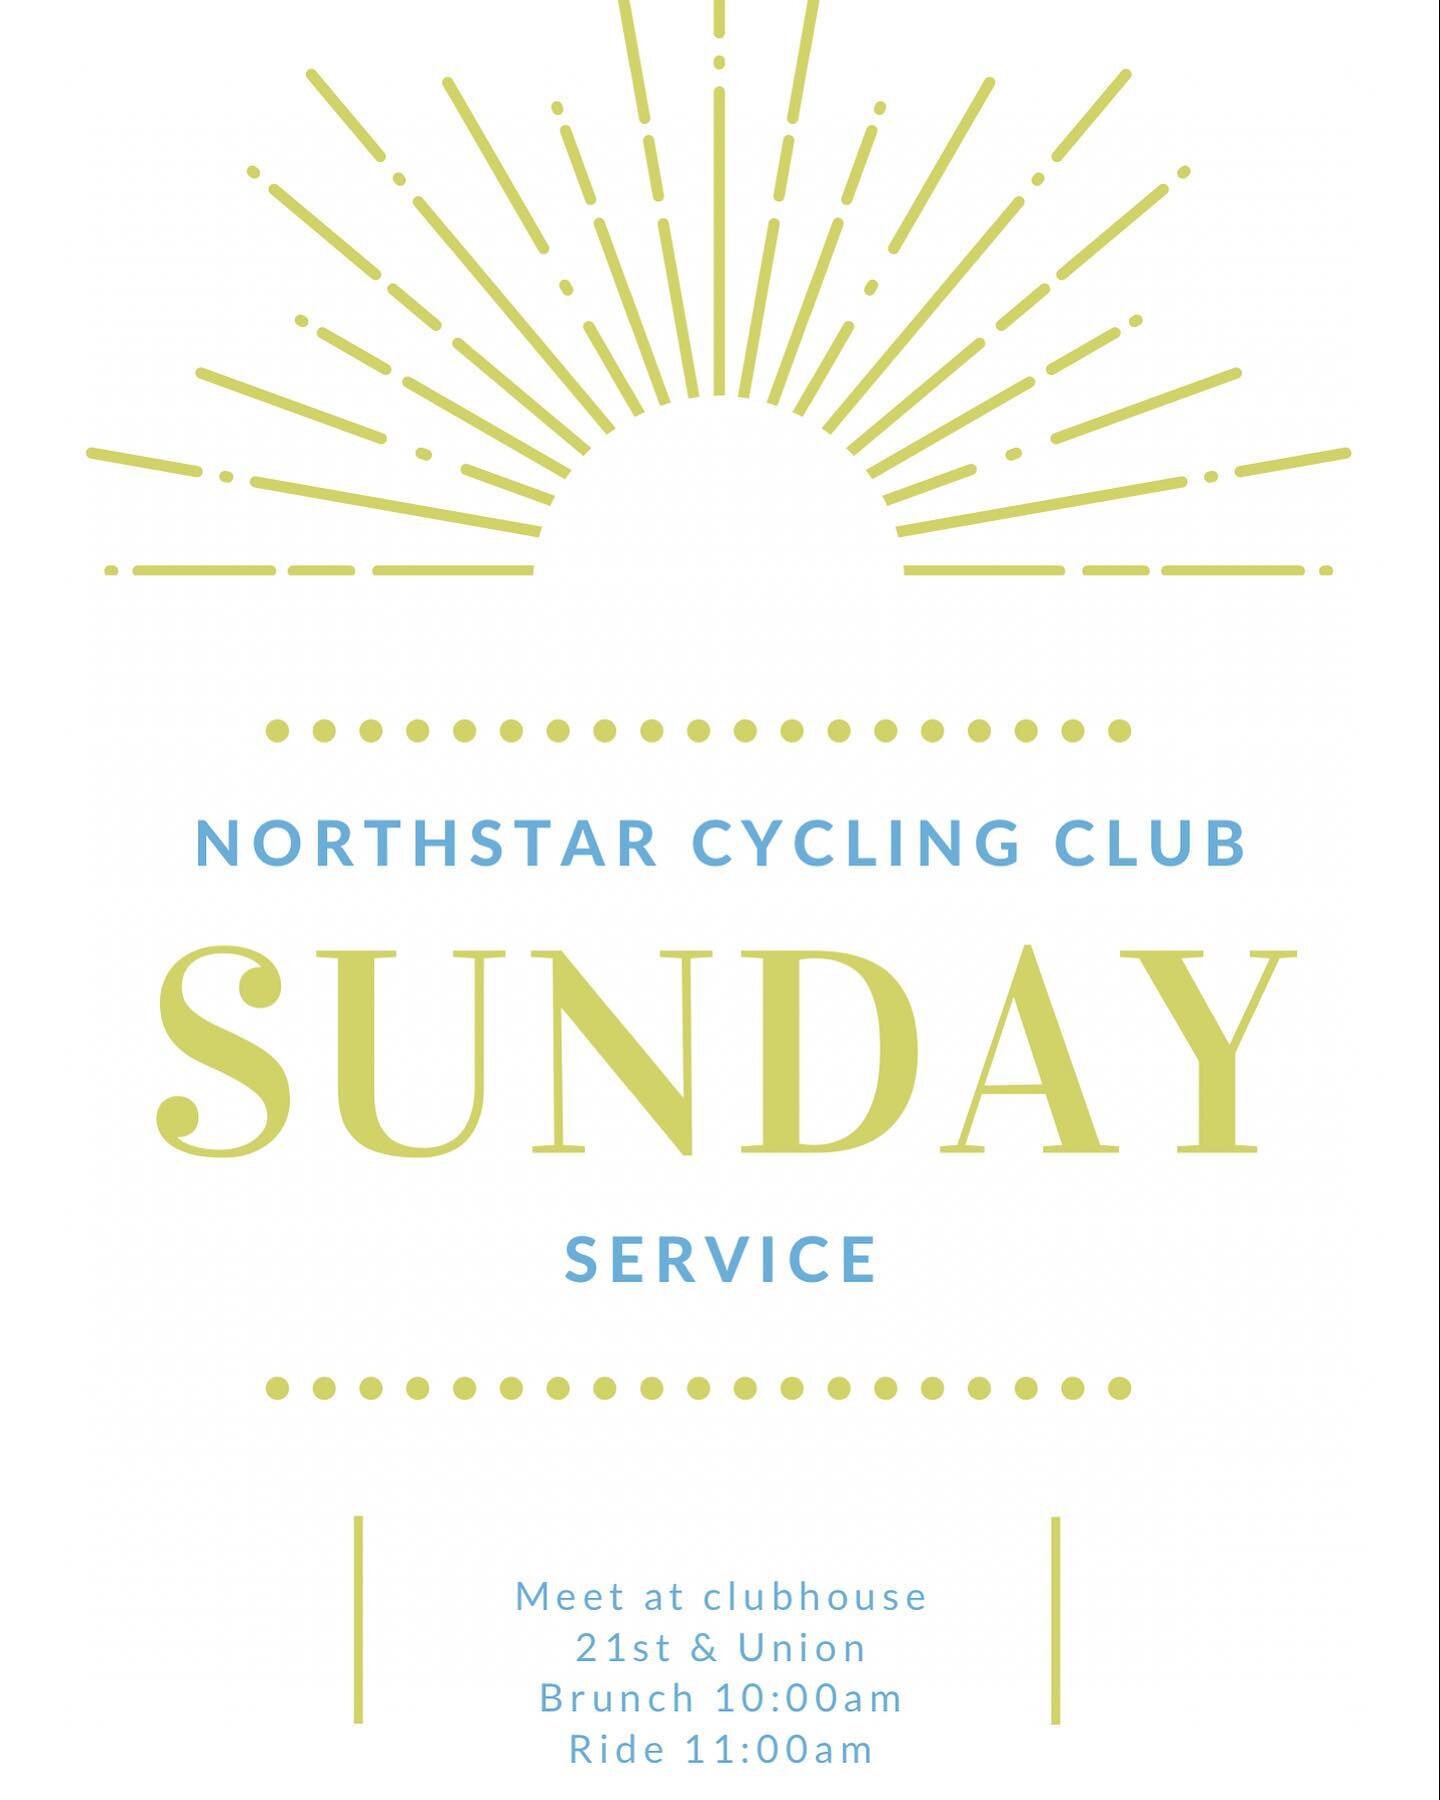 Sunday fun day! Come ride with us tomorrow!! #sundayservice #northstarcycling